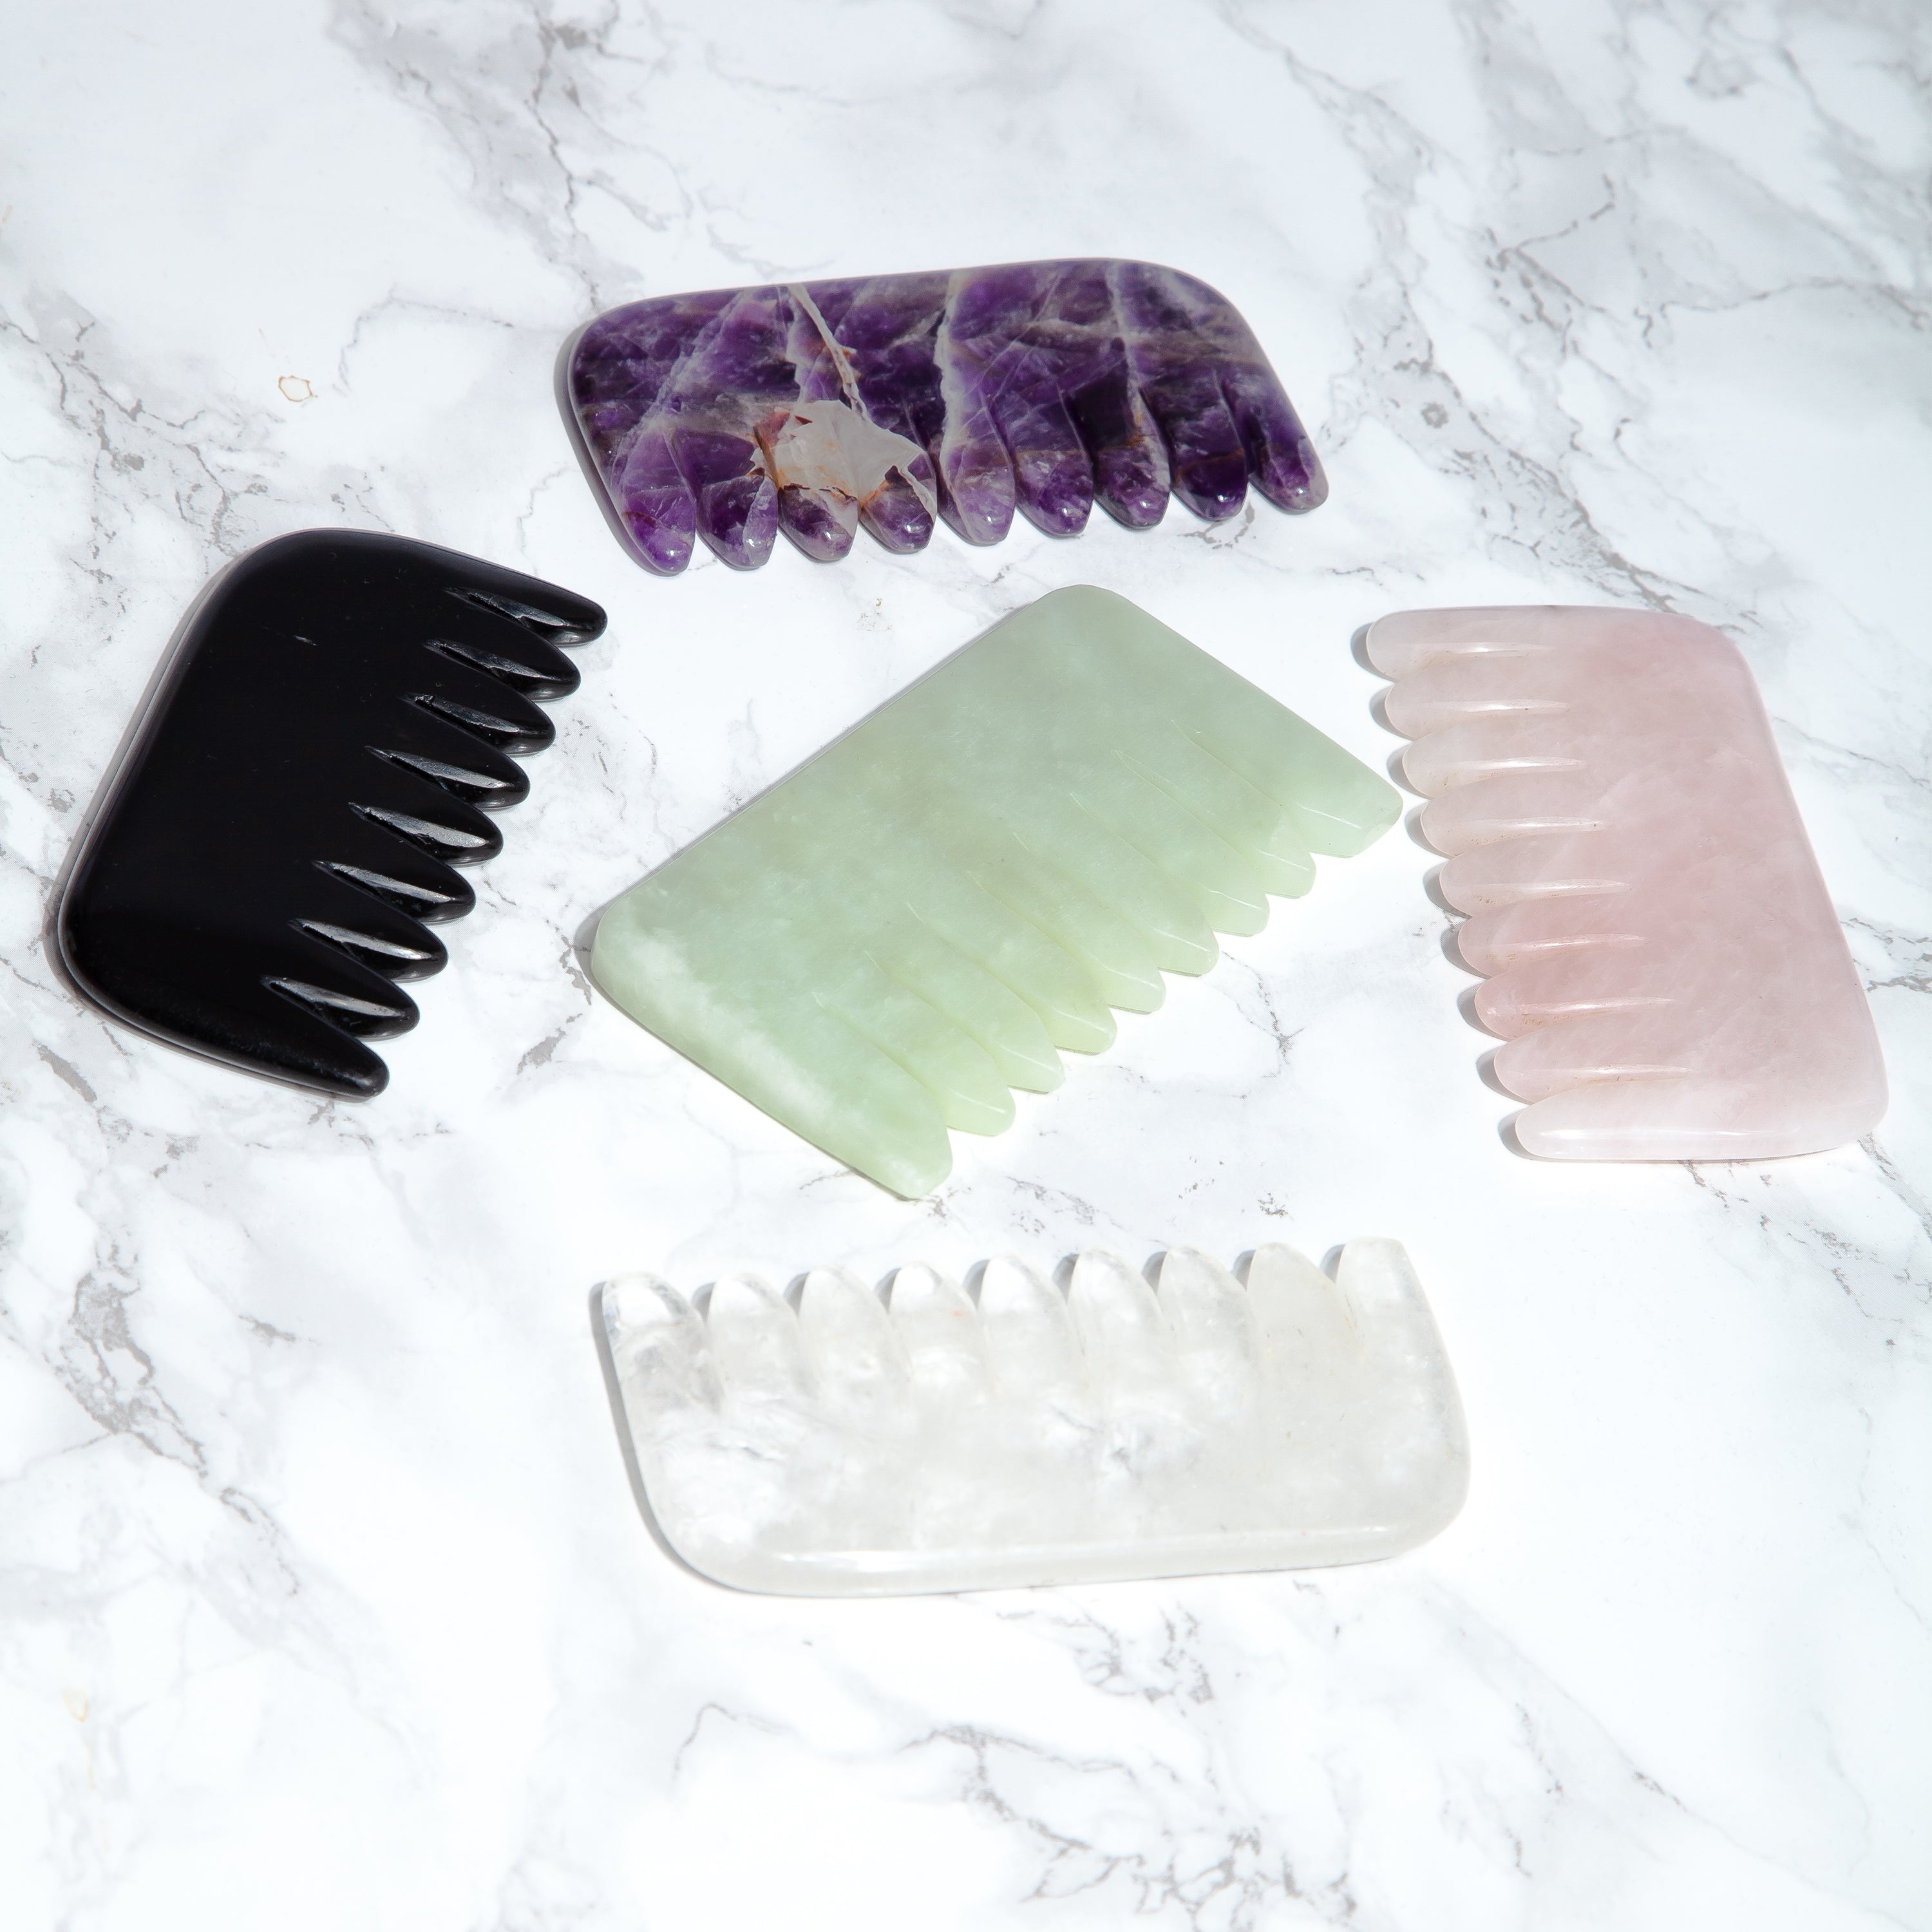 Amethyst, jade, rose quartz , black tourmaline and clear quartz crystal combs on a marble background